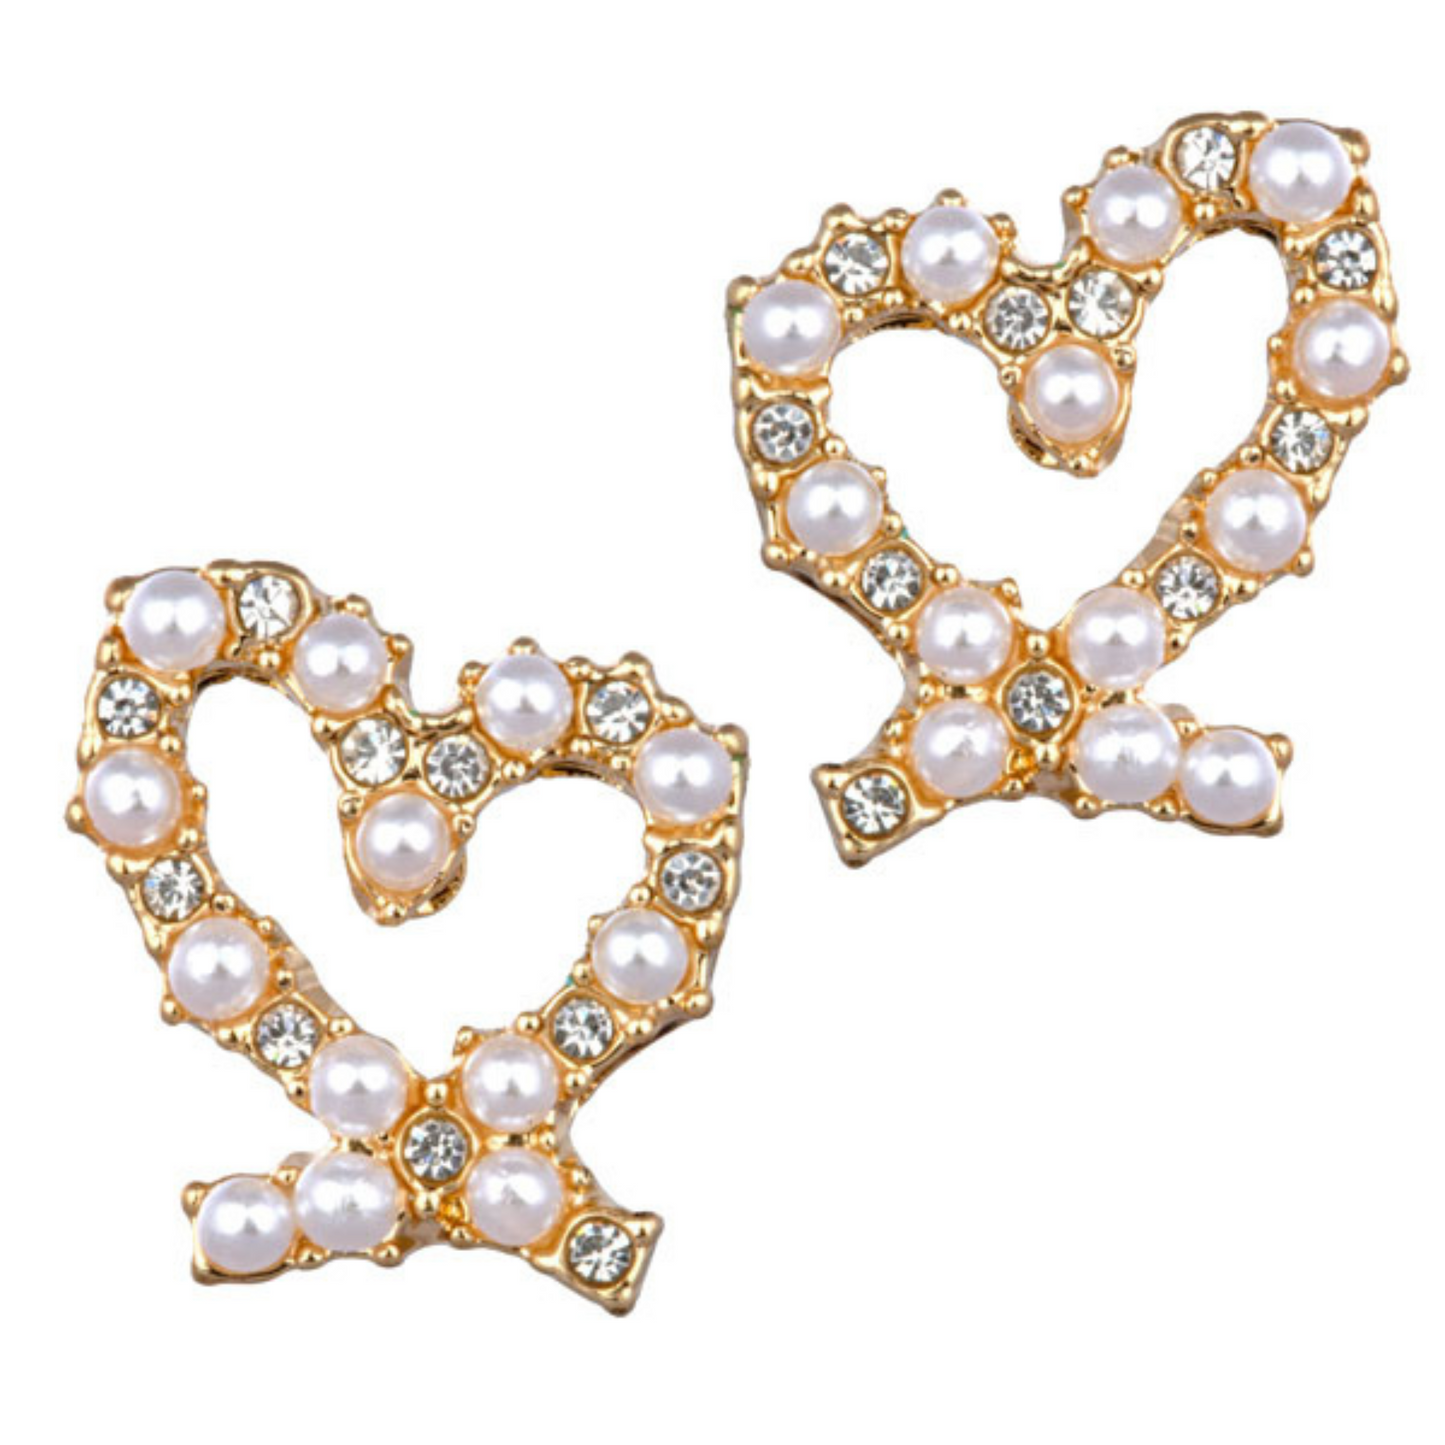 gold heart shaped stud earrings with pearl and rhinestone accents